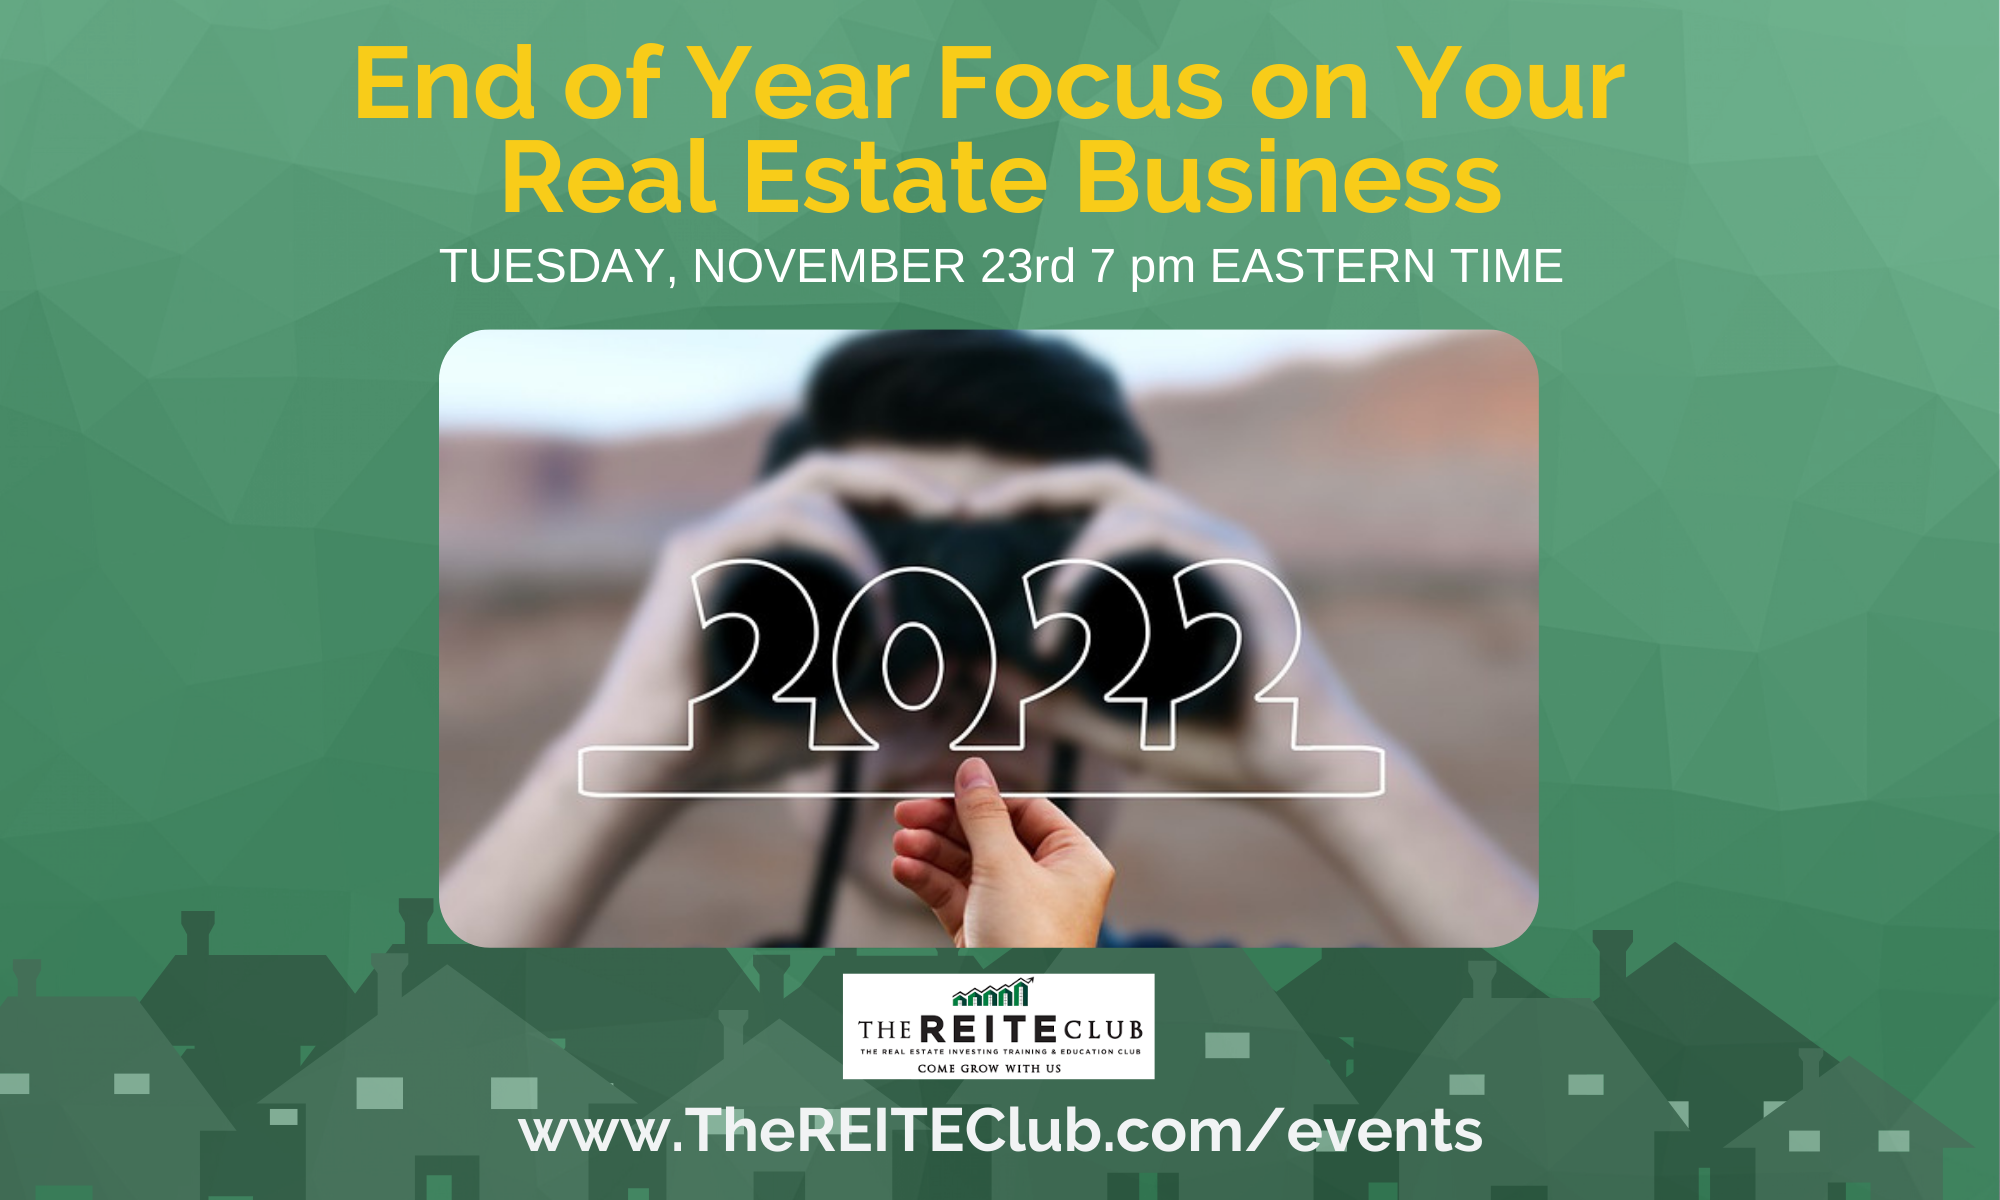 End of Year Focus on Your Real Estate Business